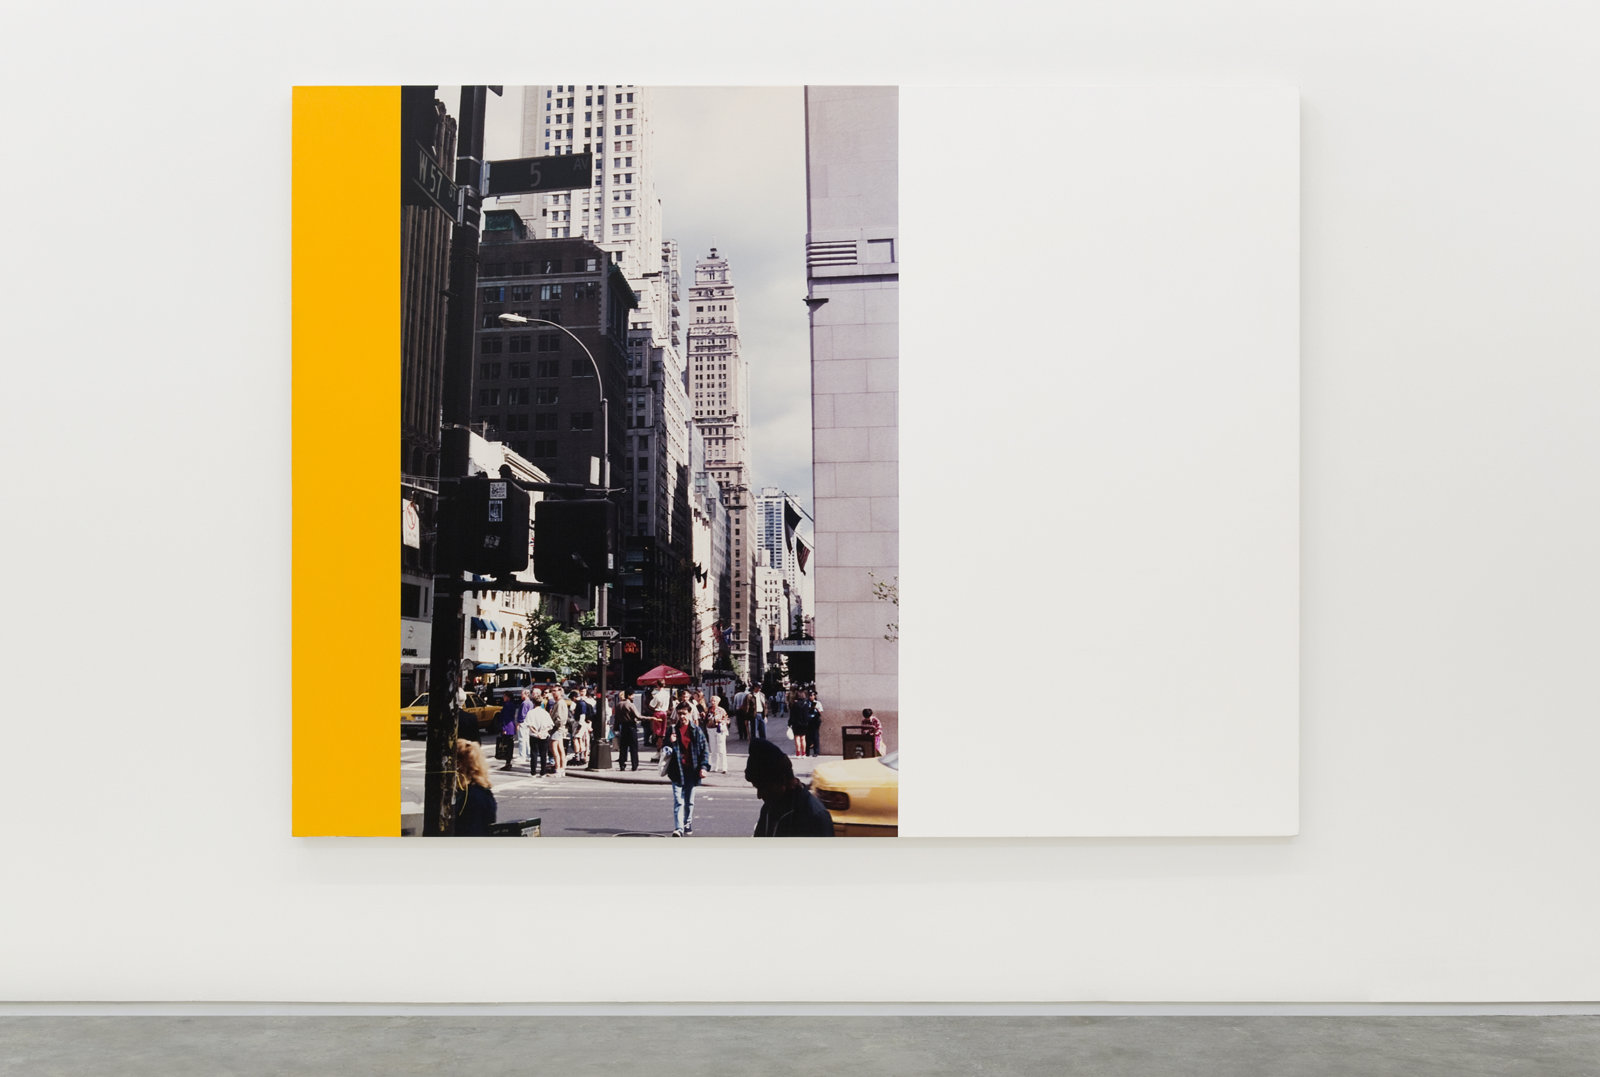 Ian Wallace, New York City (5th &amp; 57th) I, 1993–2001, acrylic and photolaminate on canvas, 96 x 72 in. (244 x 183 cm)